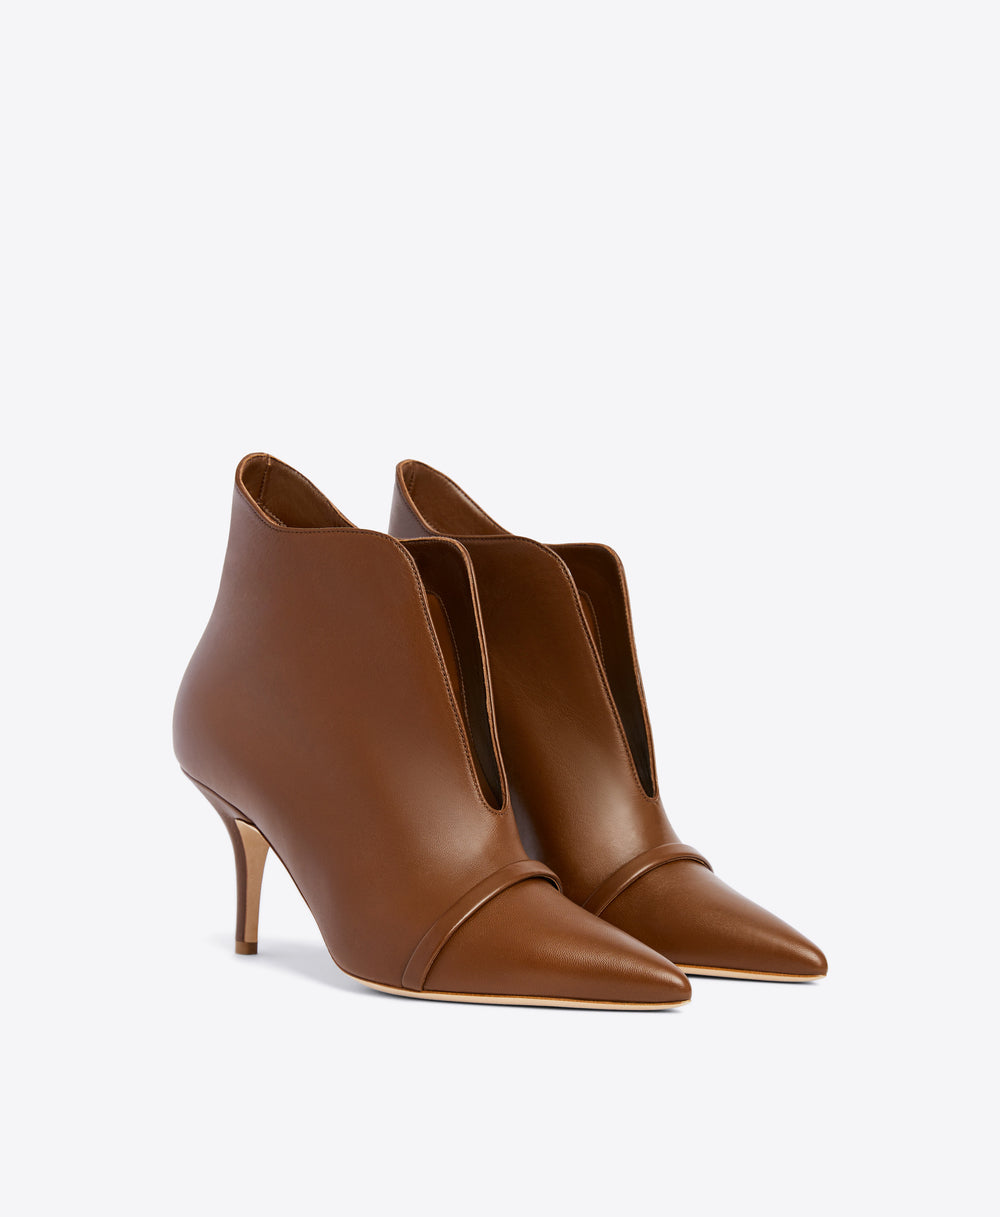 Designer Women's Boots | Ladies Boots | Malone Souliers